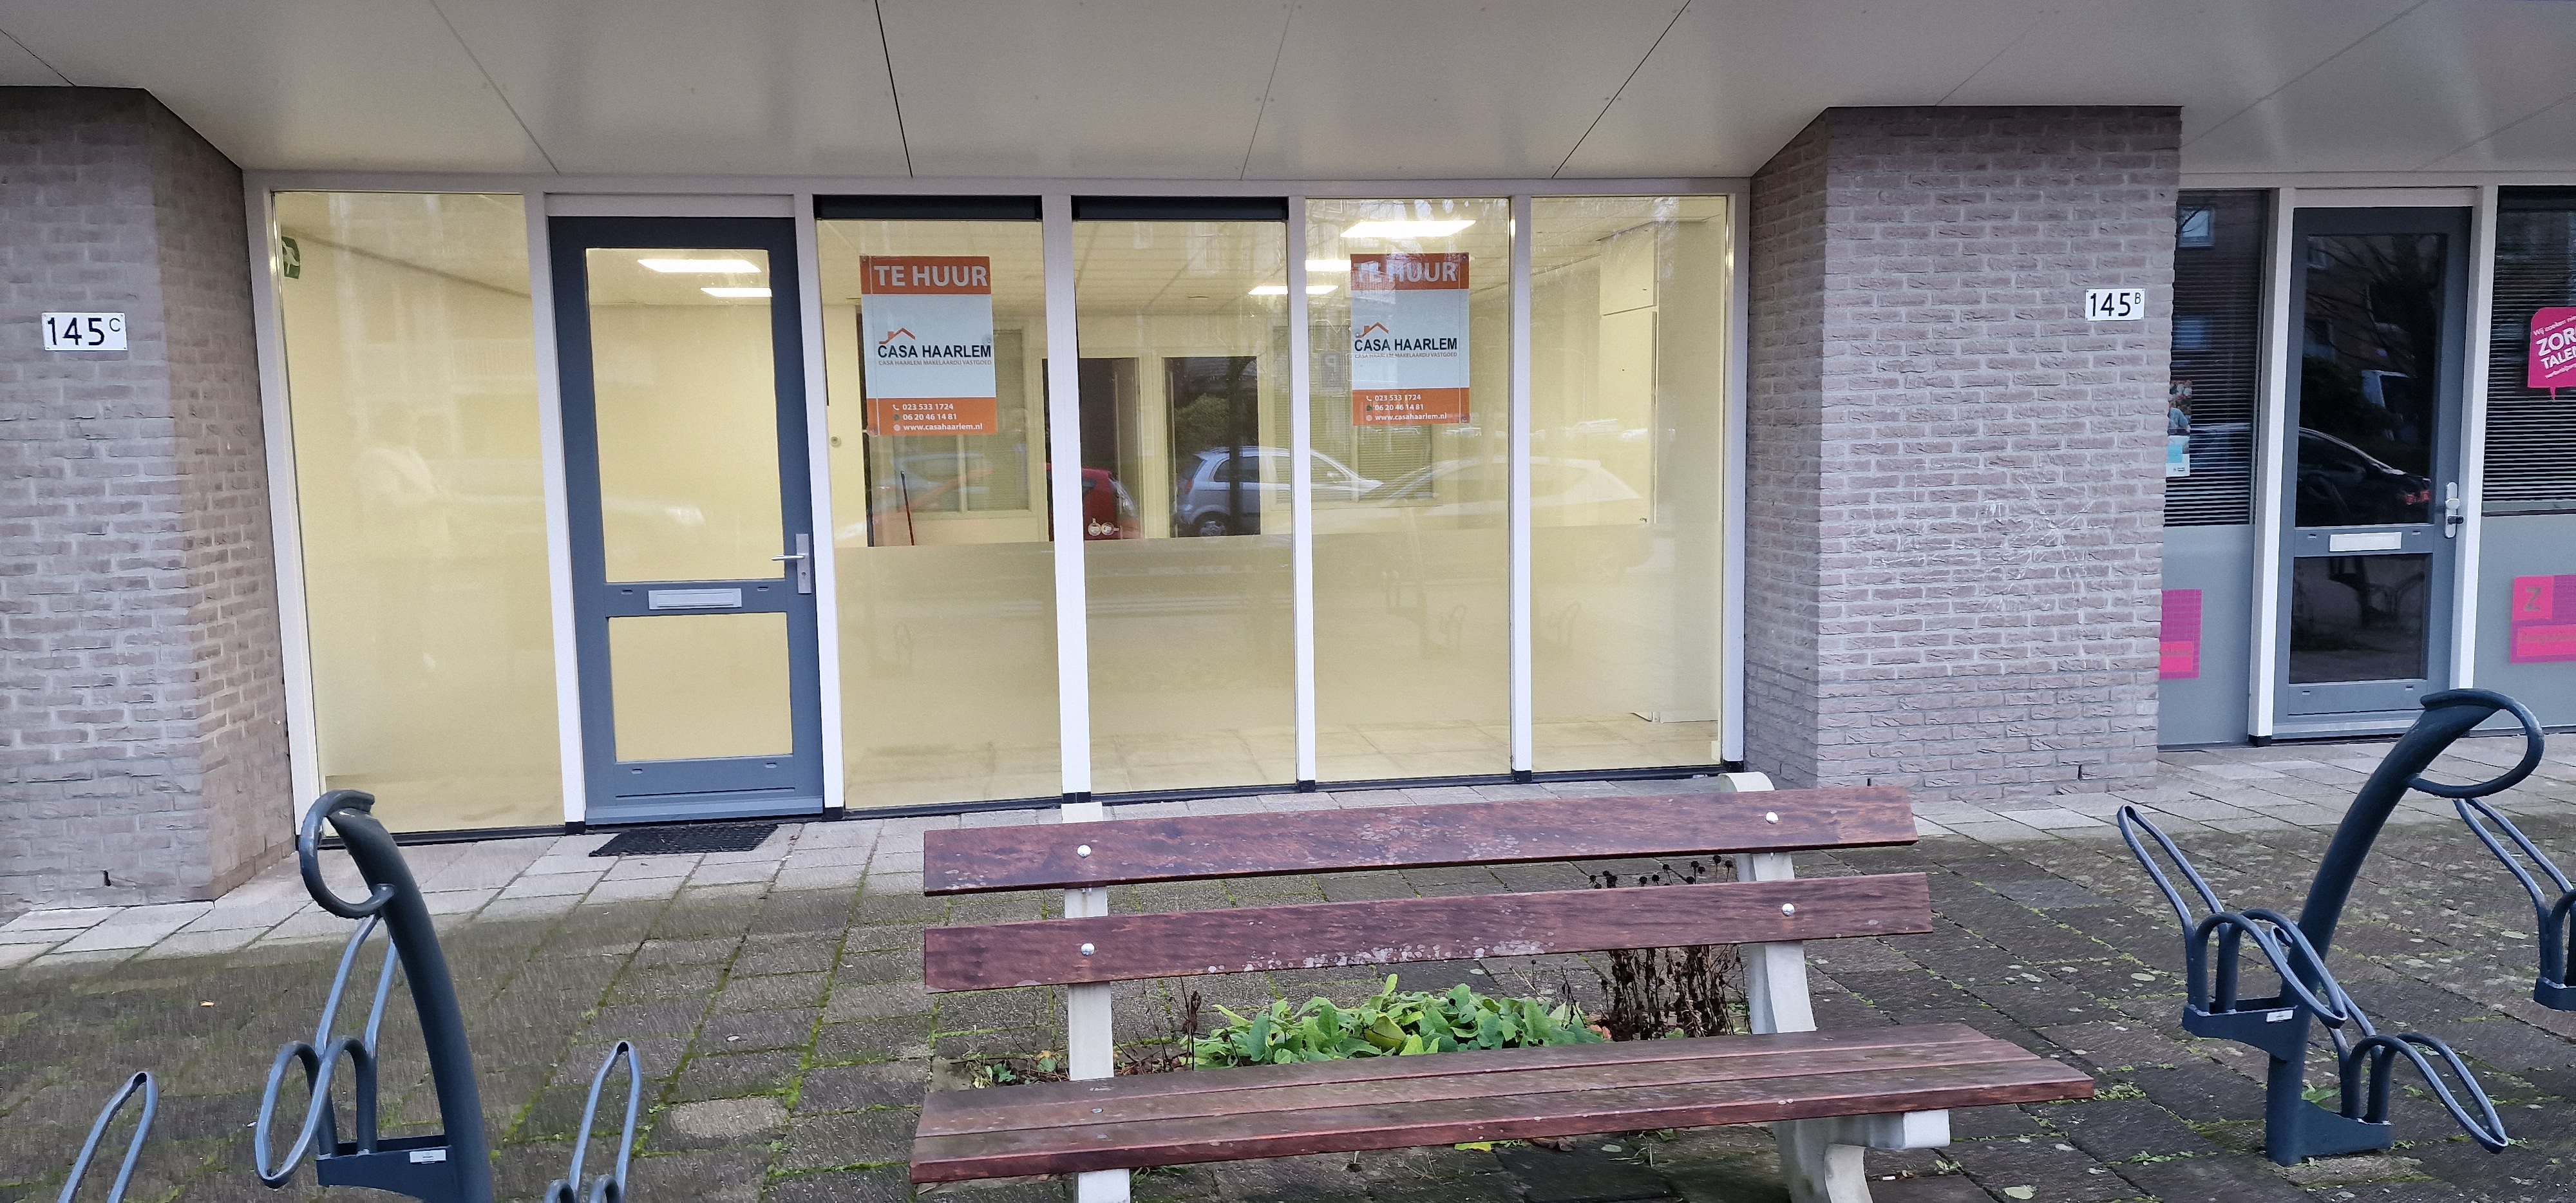 New retail property for rent in Haarlem